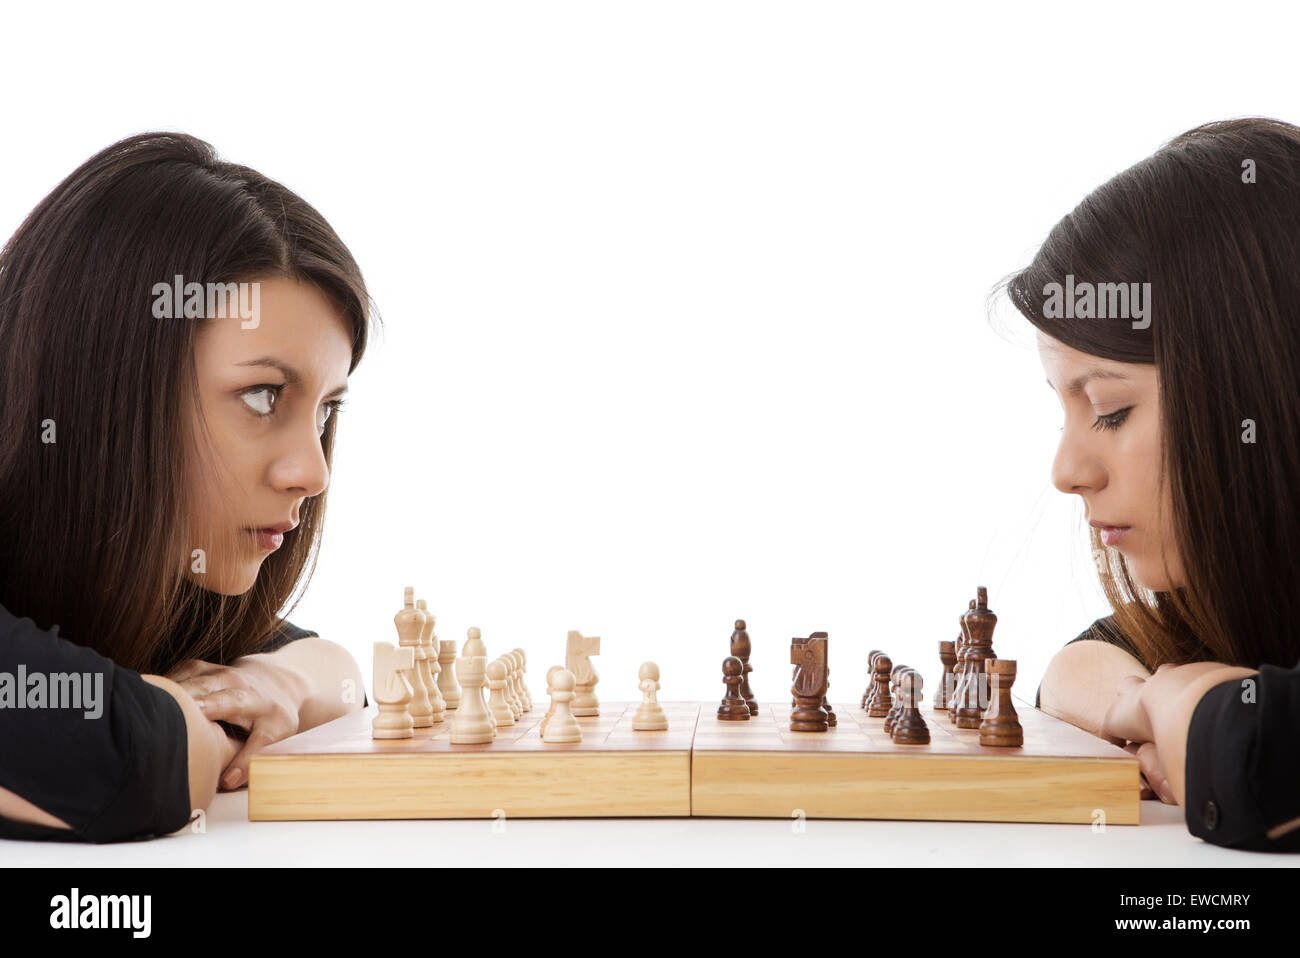 young woman playing chess against herself shot in the studio Stock Photo